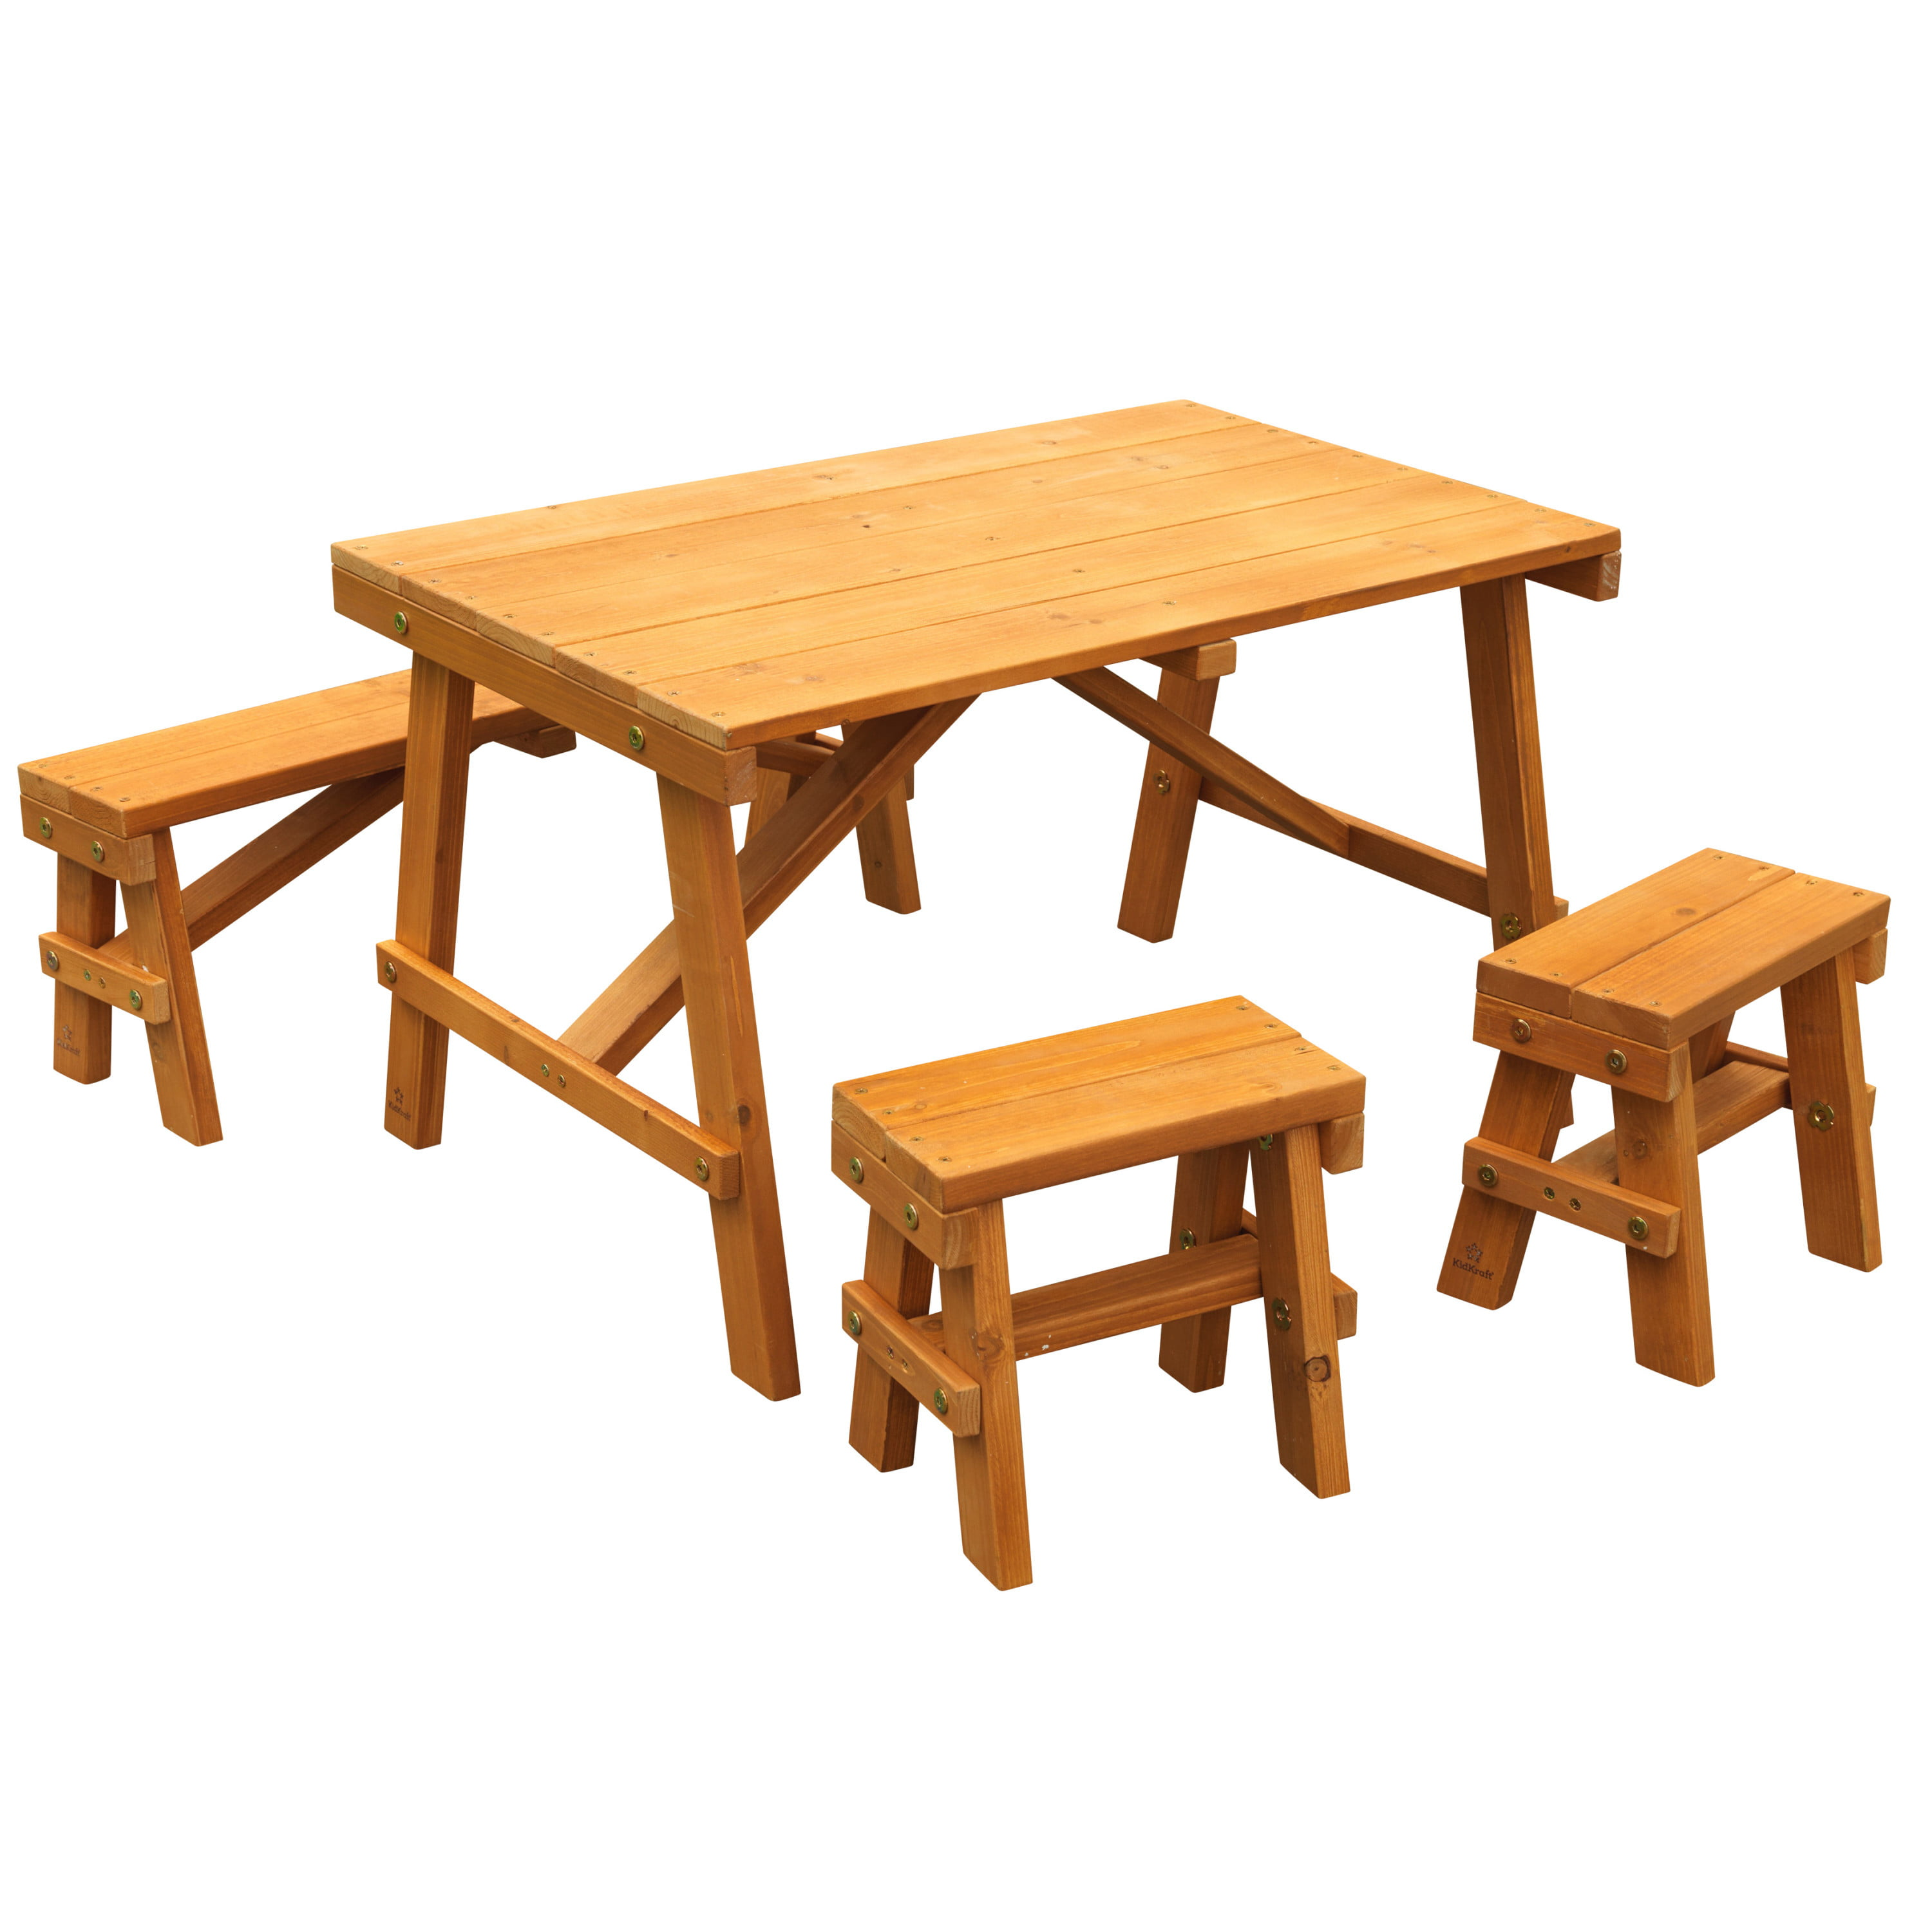 KidKraft Wooden Outdoor Picnic Table with Three Benches (Amber) $69.00 @ Walmart